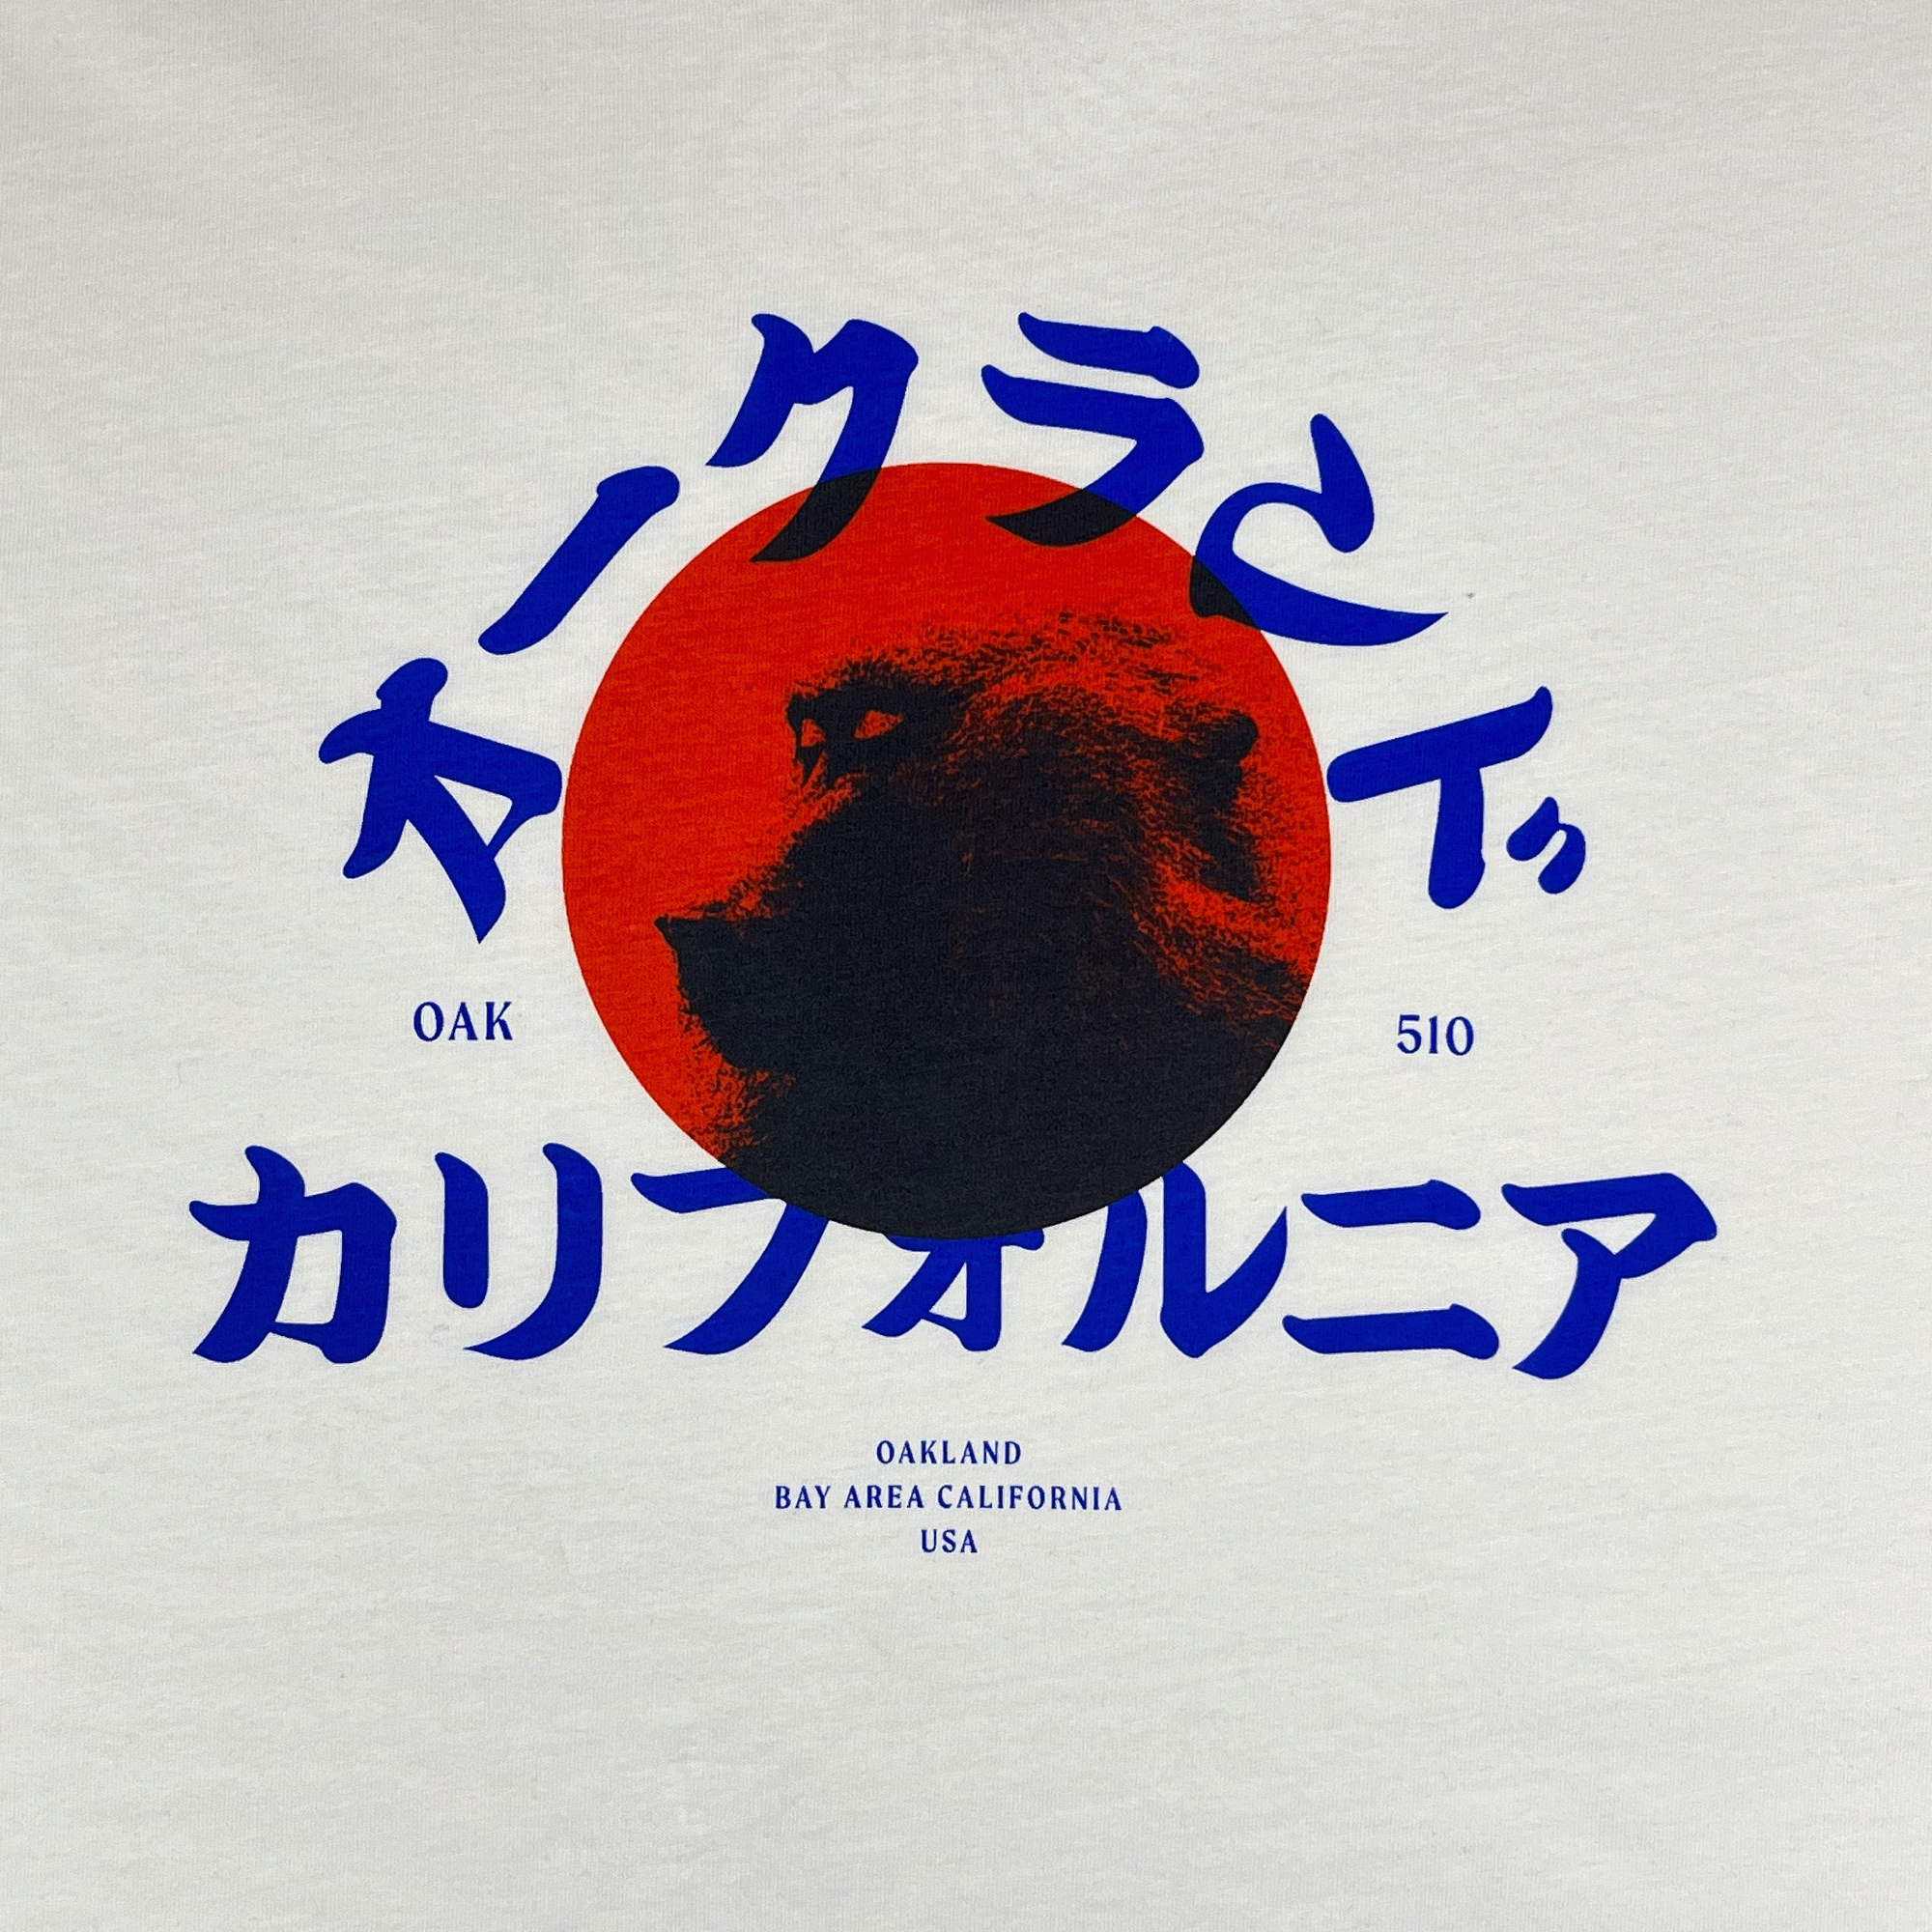 Close-up of snow monkey graphic with Asian written characters, Oak 510 wordmark & Oakland Bay Area California wordmark on white t-shirt.